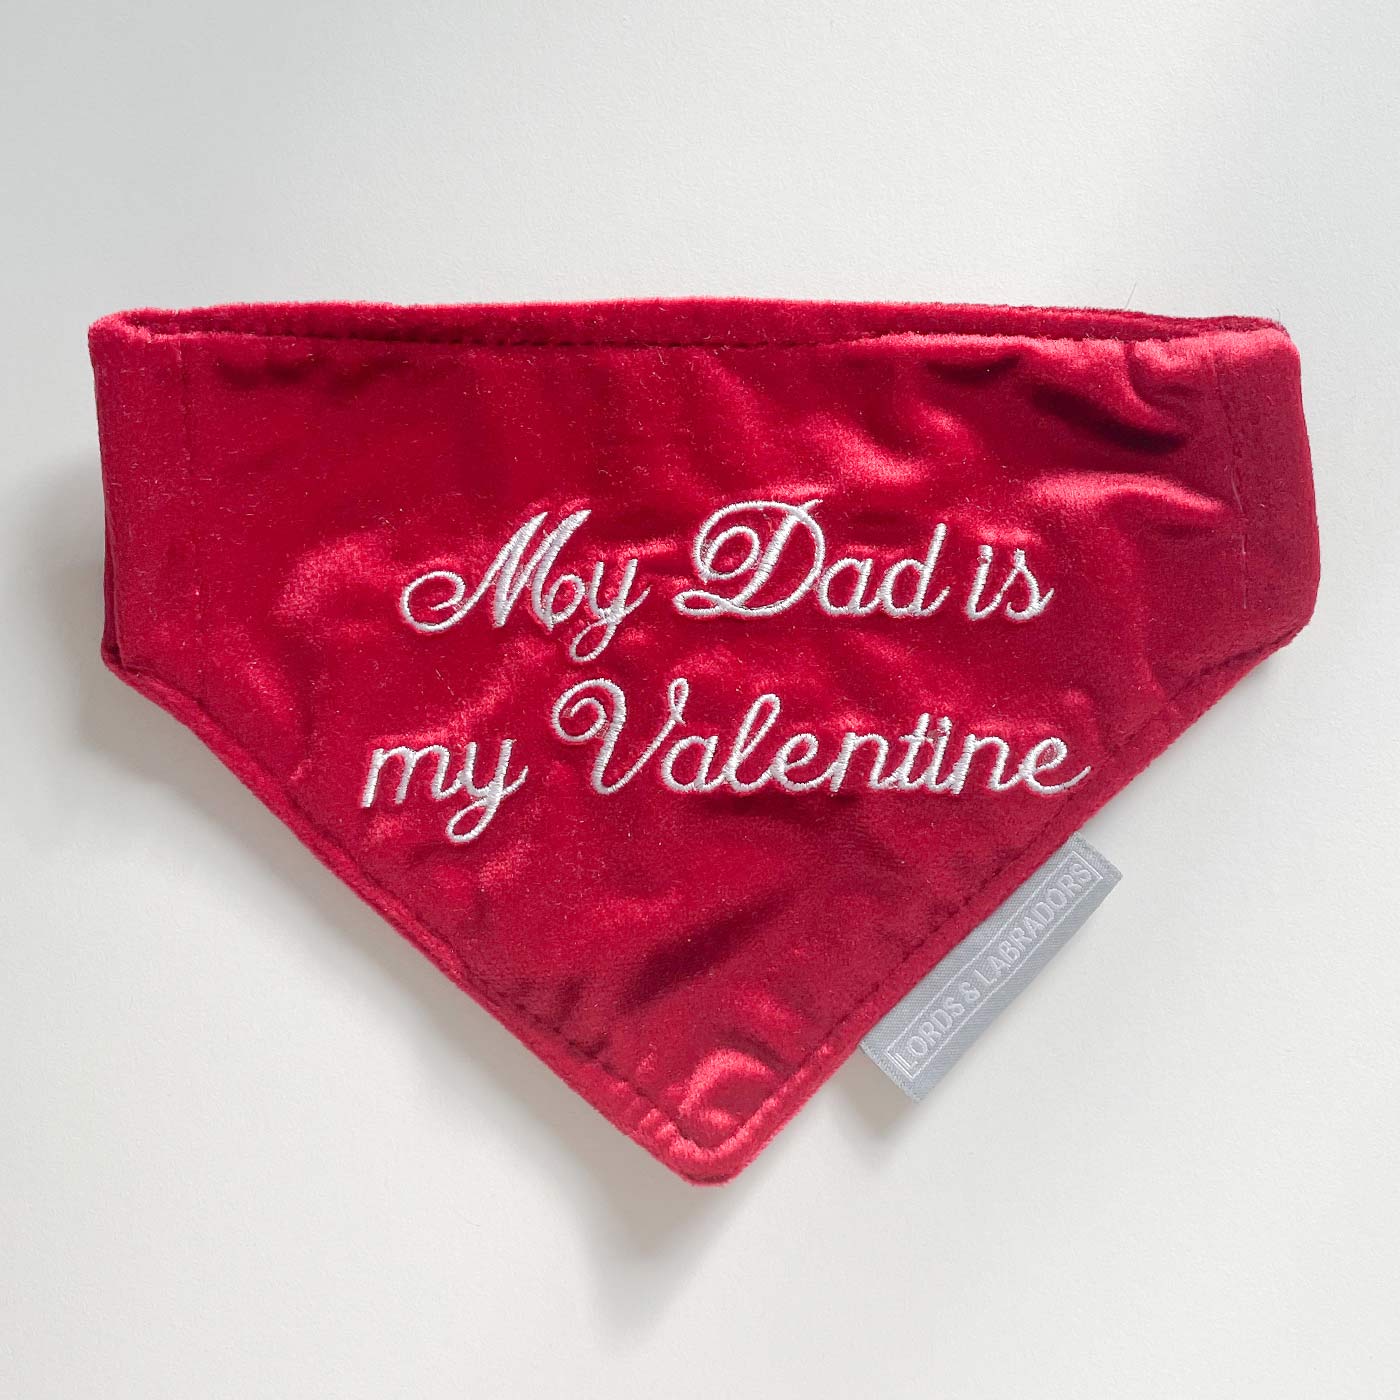 Discover The Perfect Bandana For Dogs, 'My Dad Is My Valentine' Valentine Dog Bandana In Luxury Cranberry Velvet, Available Now at Lords & Labradors